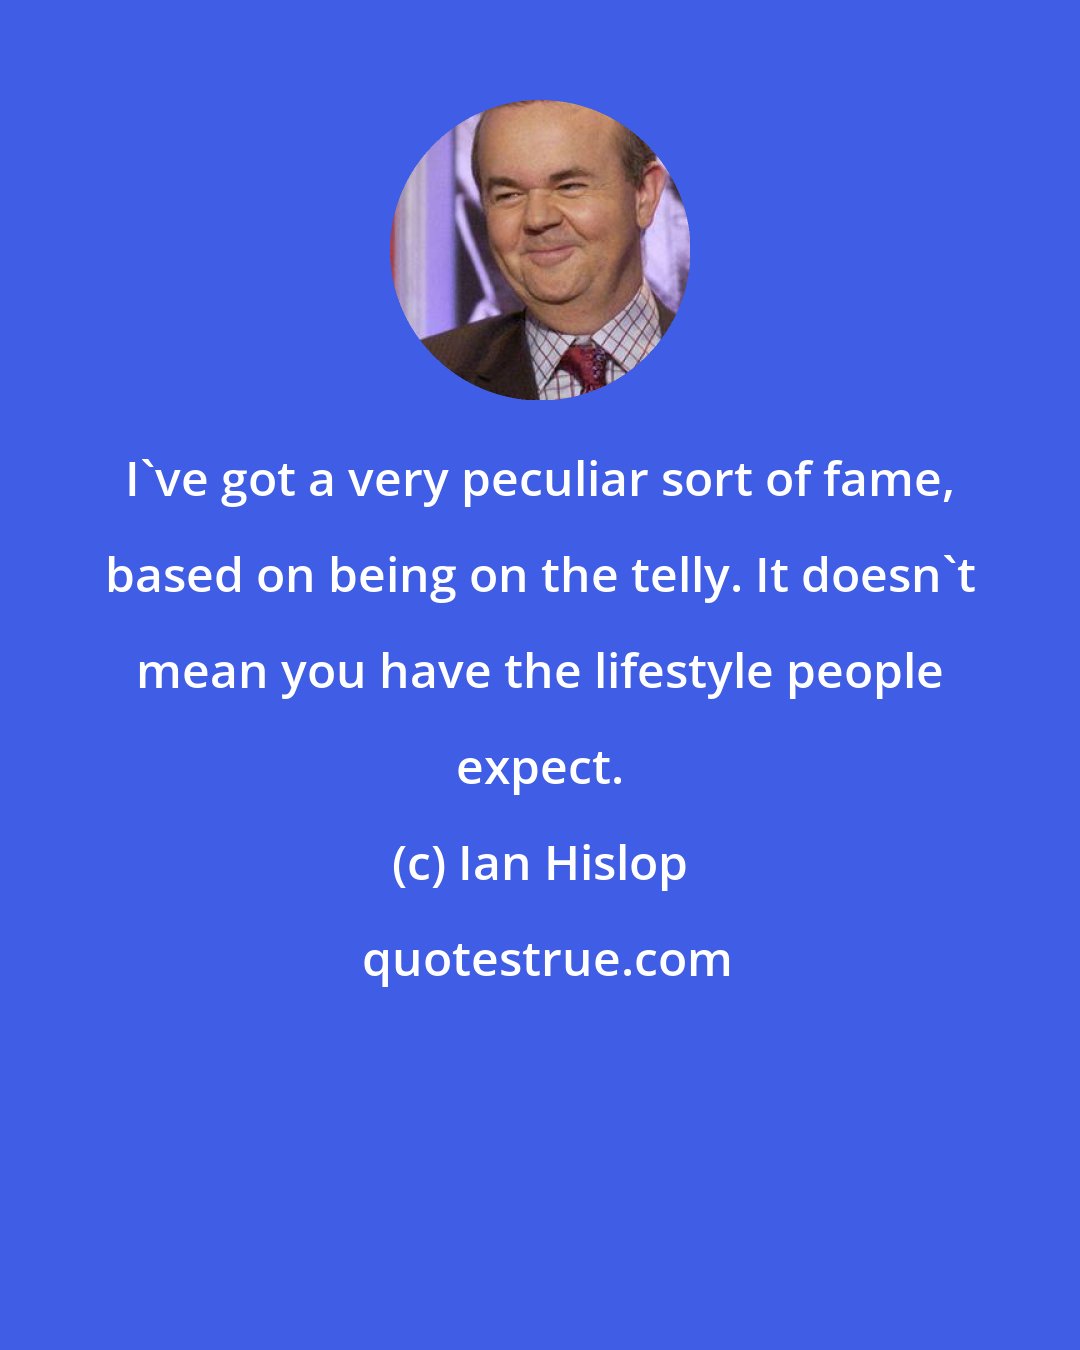 Ian Hislop: I've got a very peculiar sort of fame, based on being on the telly. It doesn't mean you have the lifestyle people expect.